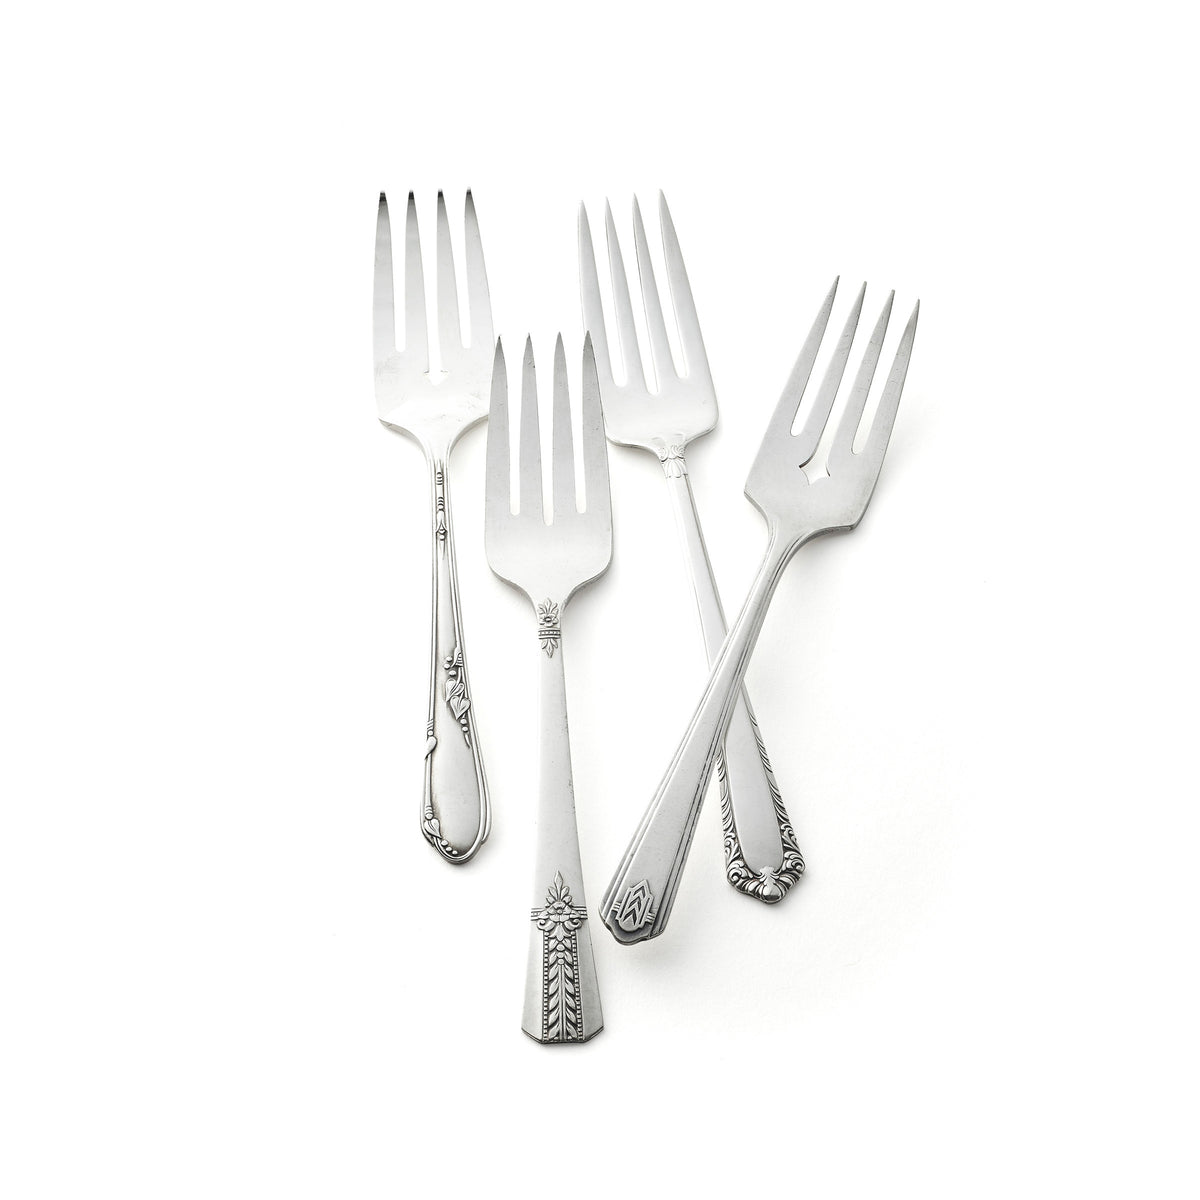 Vintage, silver-plated salad and dessert forks collected by Caskata.